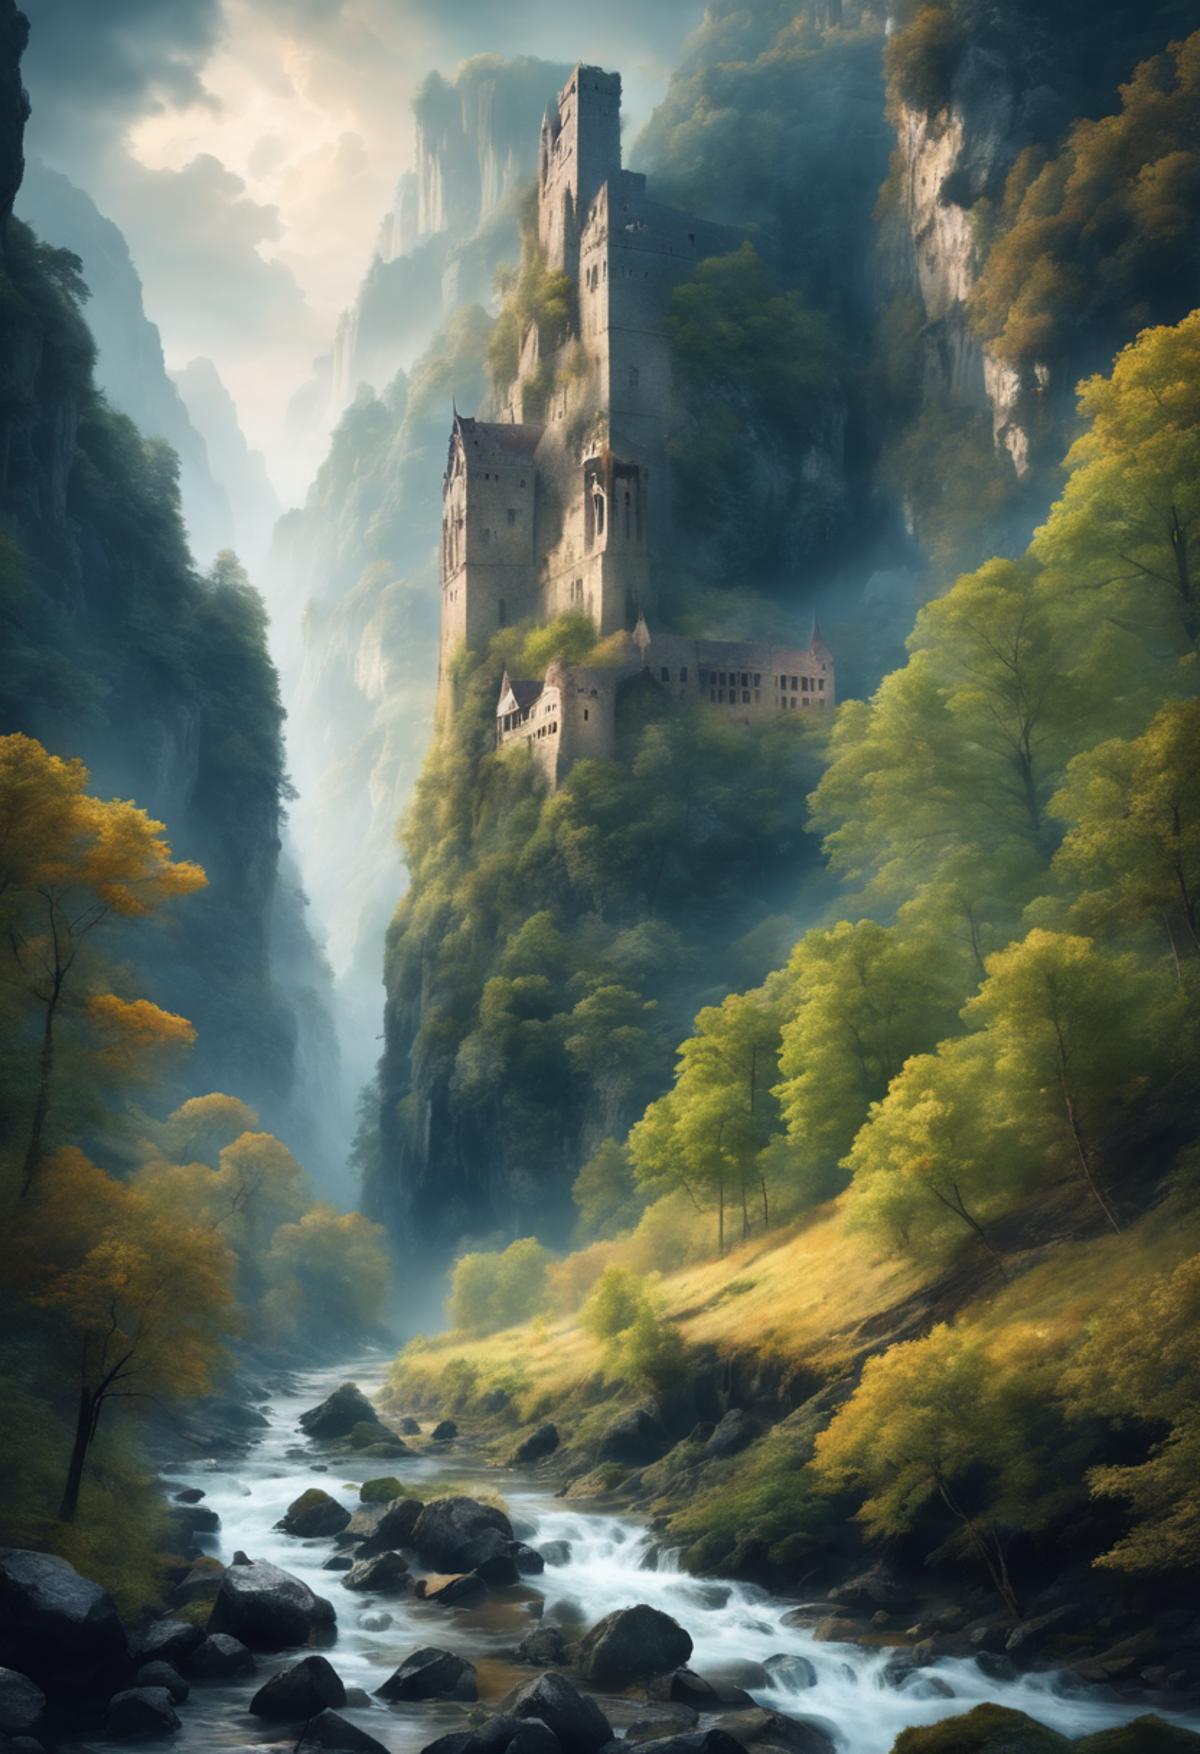 Ancient castle hidden in a misty valley with a waterfall.